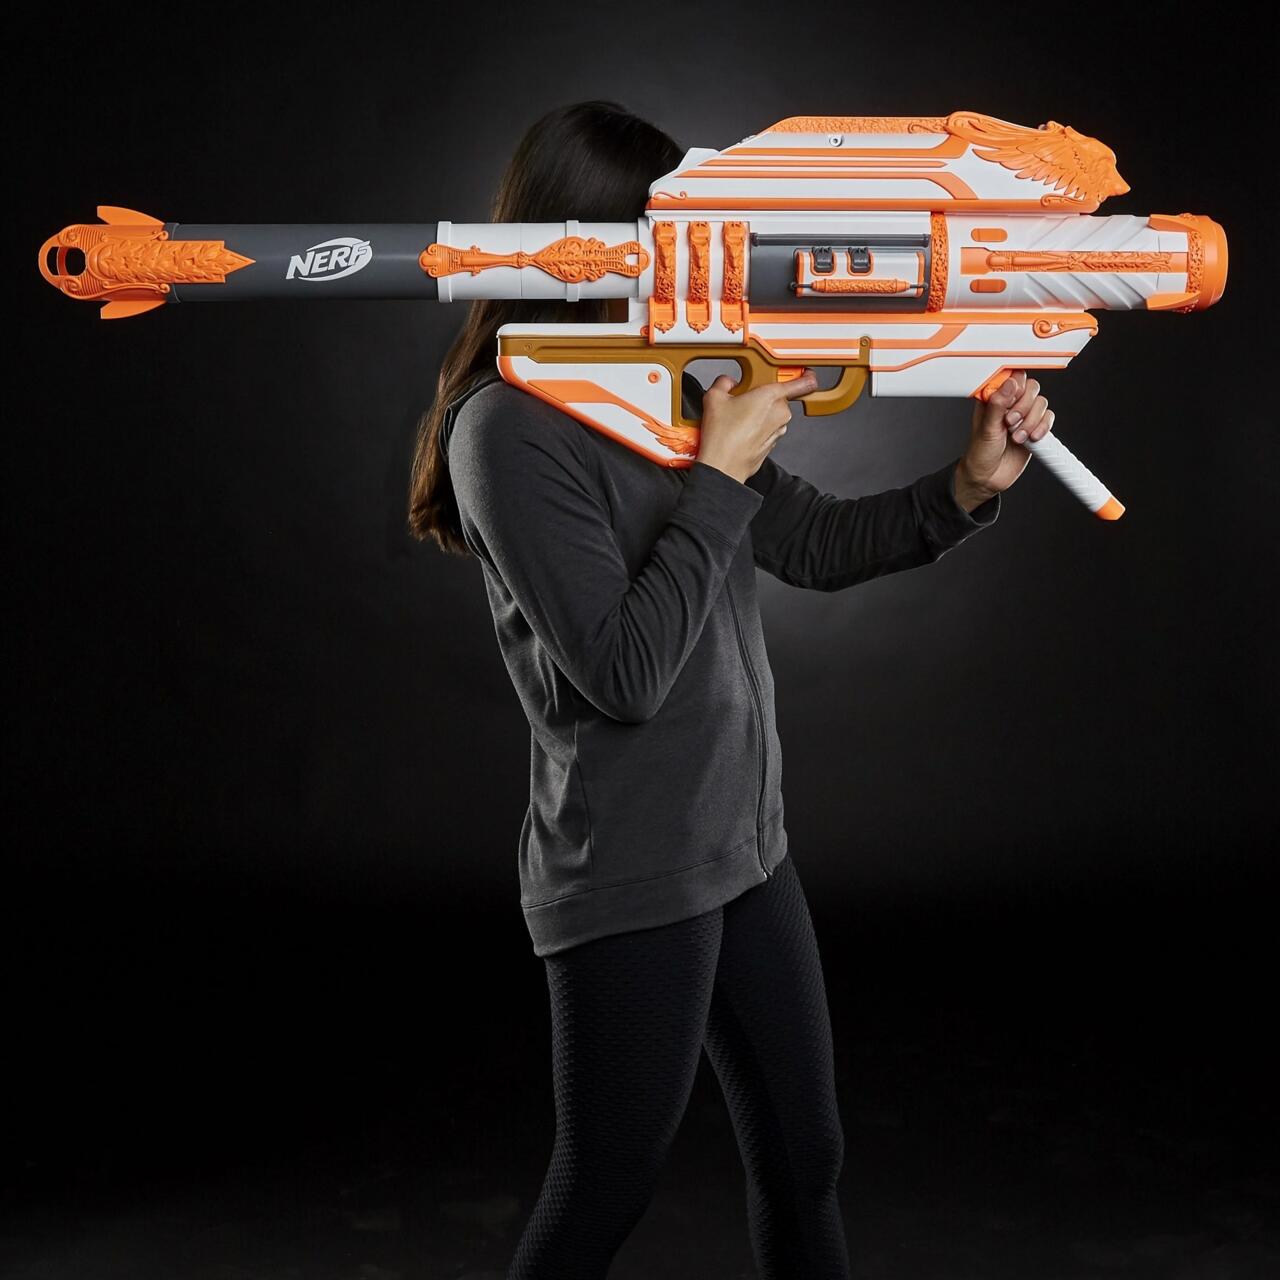 I didn't truly understand the perfection of the Nerf Gjallarhorn until I saw this picture from Bungie, displaying that it is comparable in size to an actual child. Credit: Bungie.